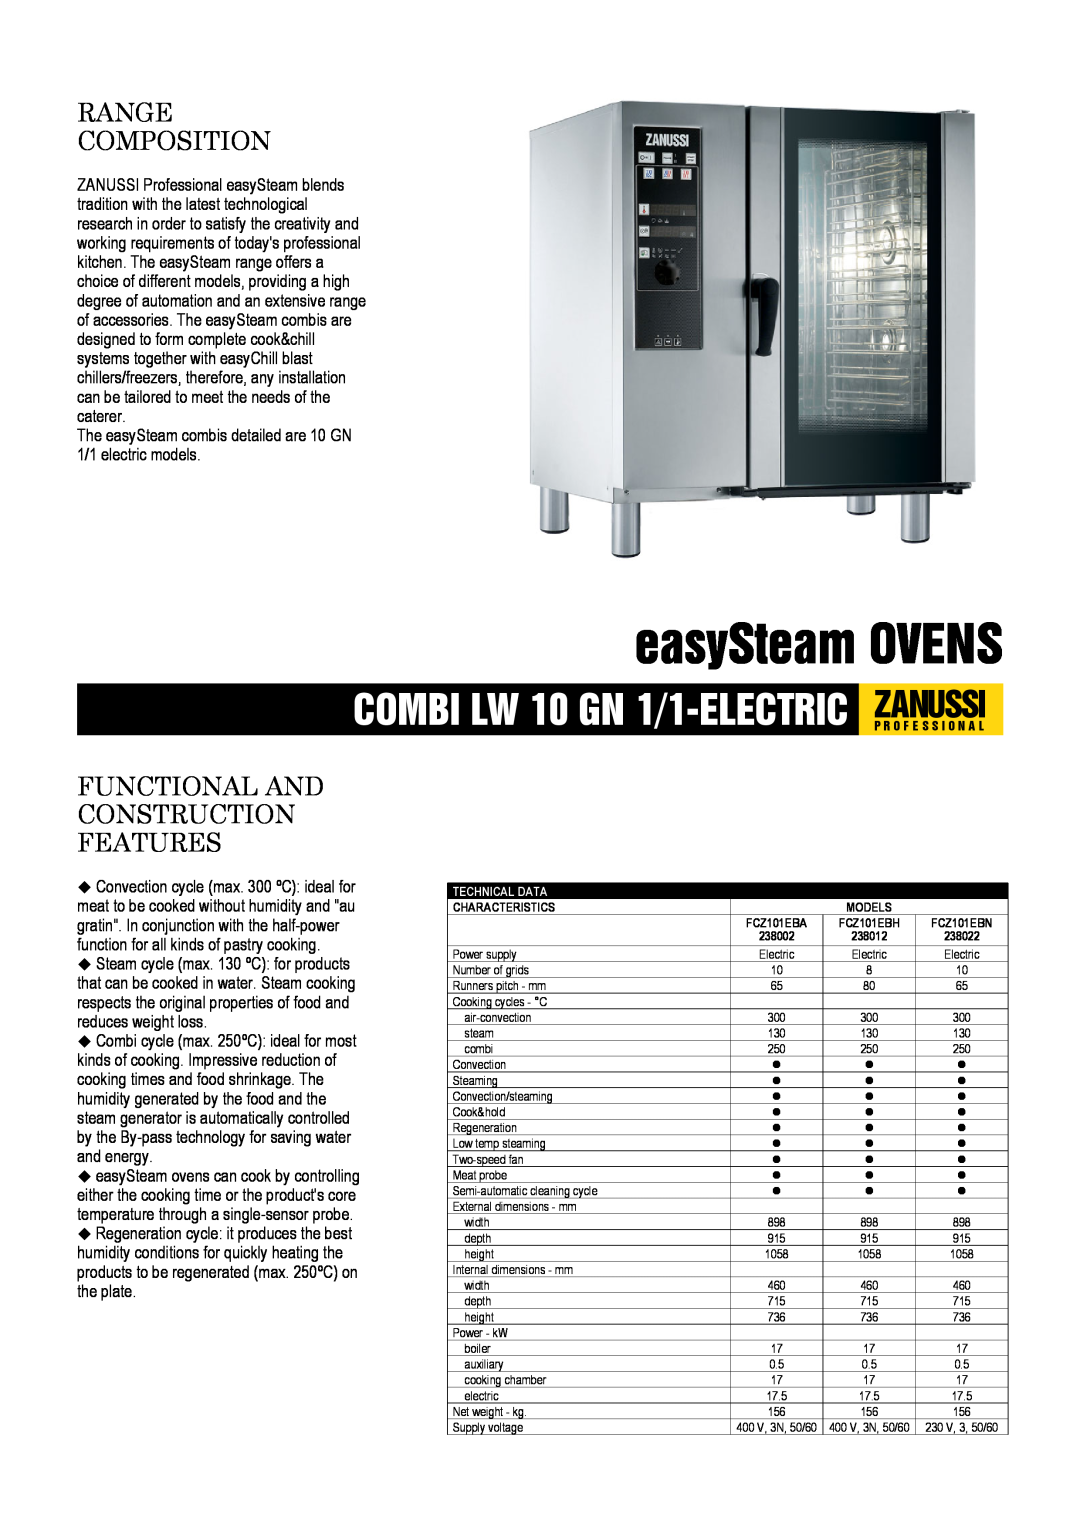 Zanussi FCZ101EBH, 238022, FCZ101EBN dimensions easySteam OVENS, Range Composition, Functional And Construction Features 